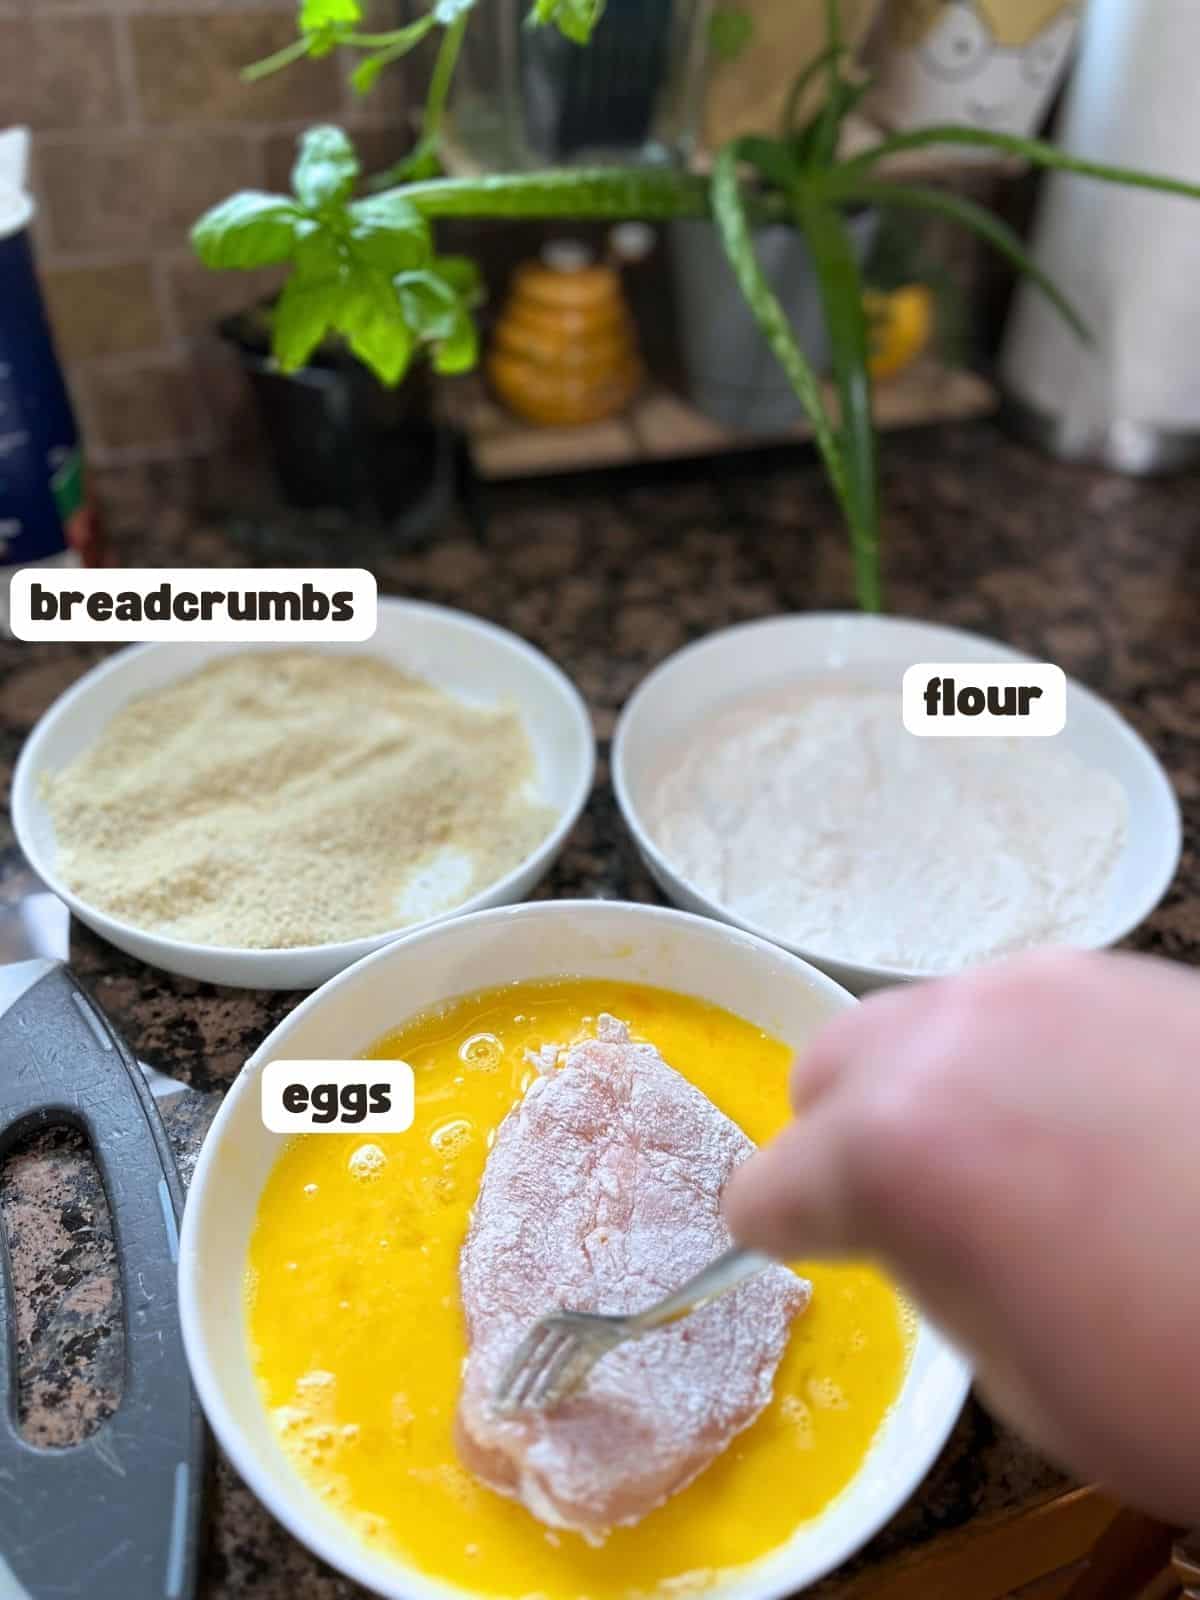 Three shallow white bowls. One filled with breadcrumbs, one with flour and one with eggs. There is a hand dripping coated chicken into the eggs.